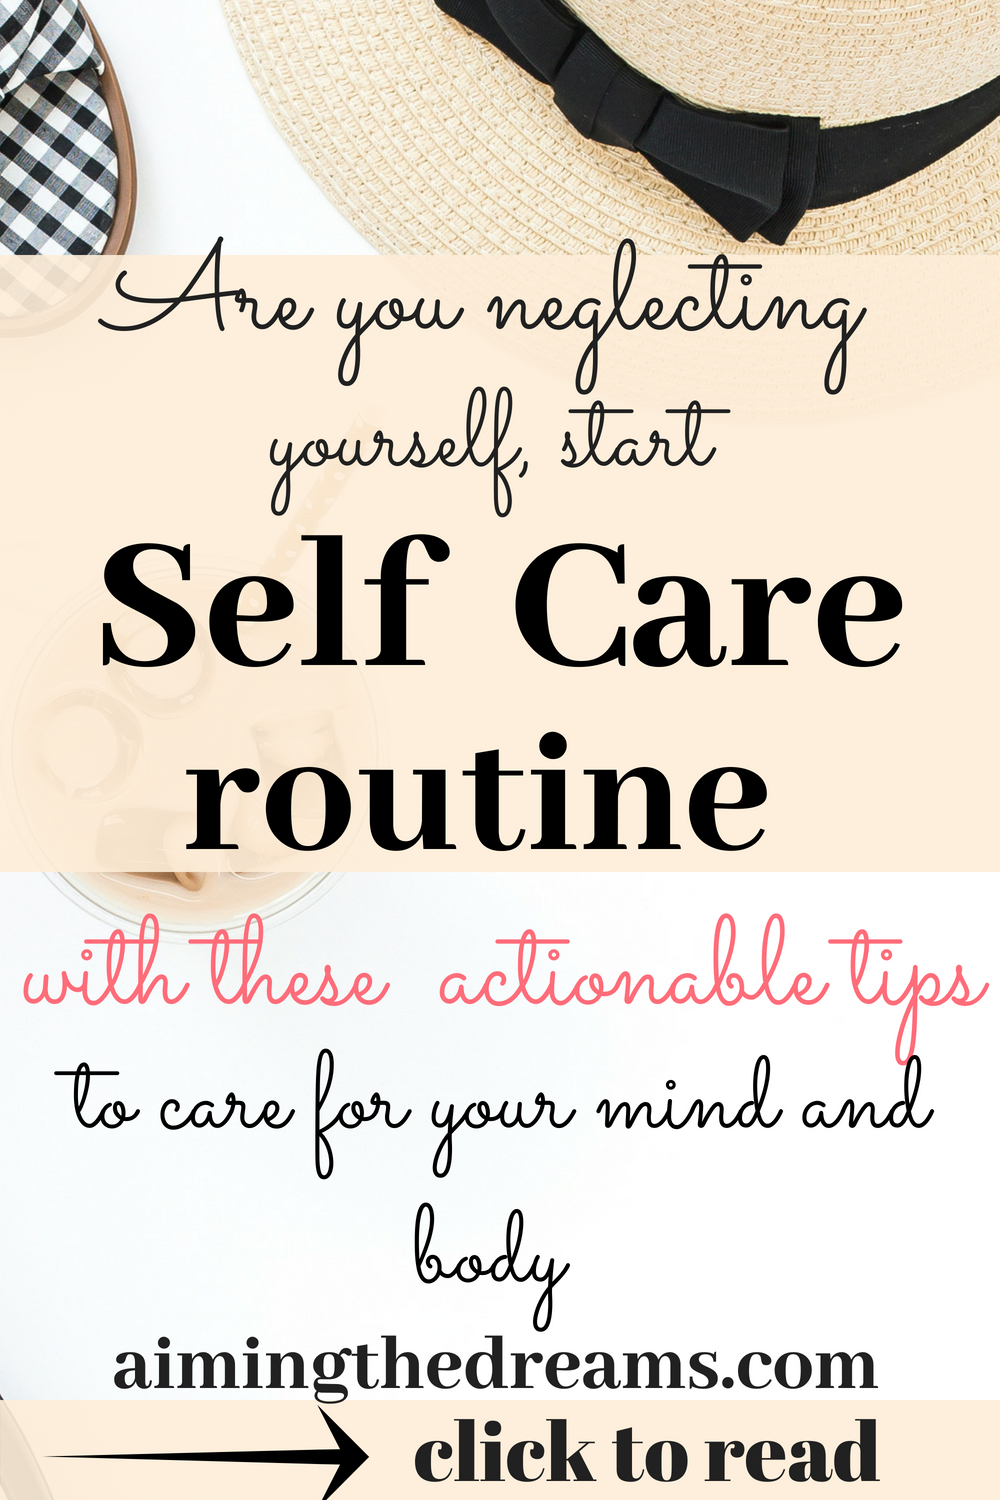 #Ideas for #selfcare routine for #stress free days when your schedule is tight.You start neglecting your self when you are busy. Don't do this instead start caring for yourself. Click to read.